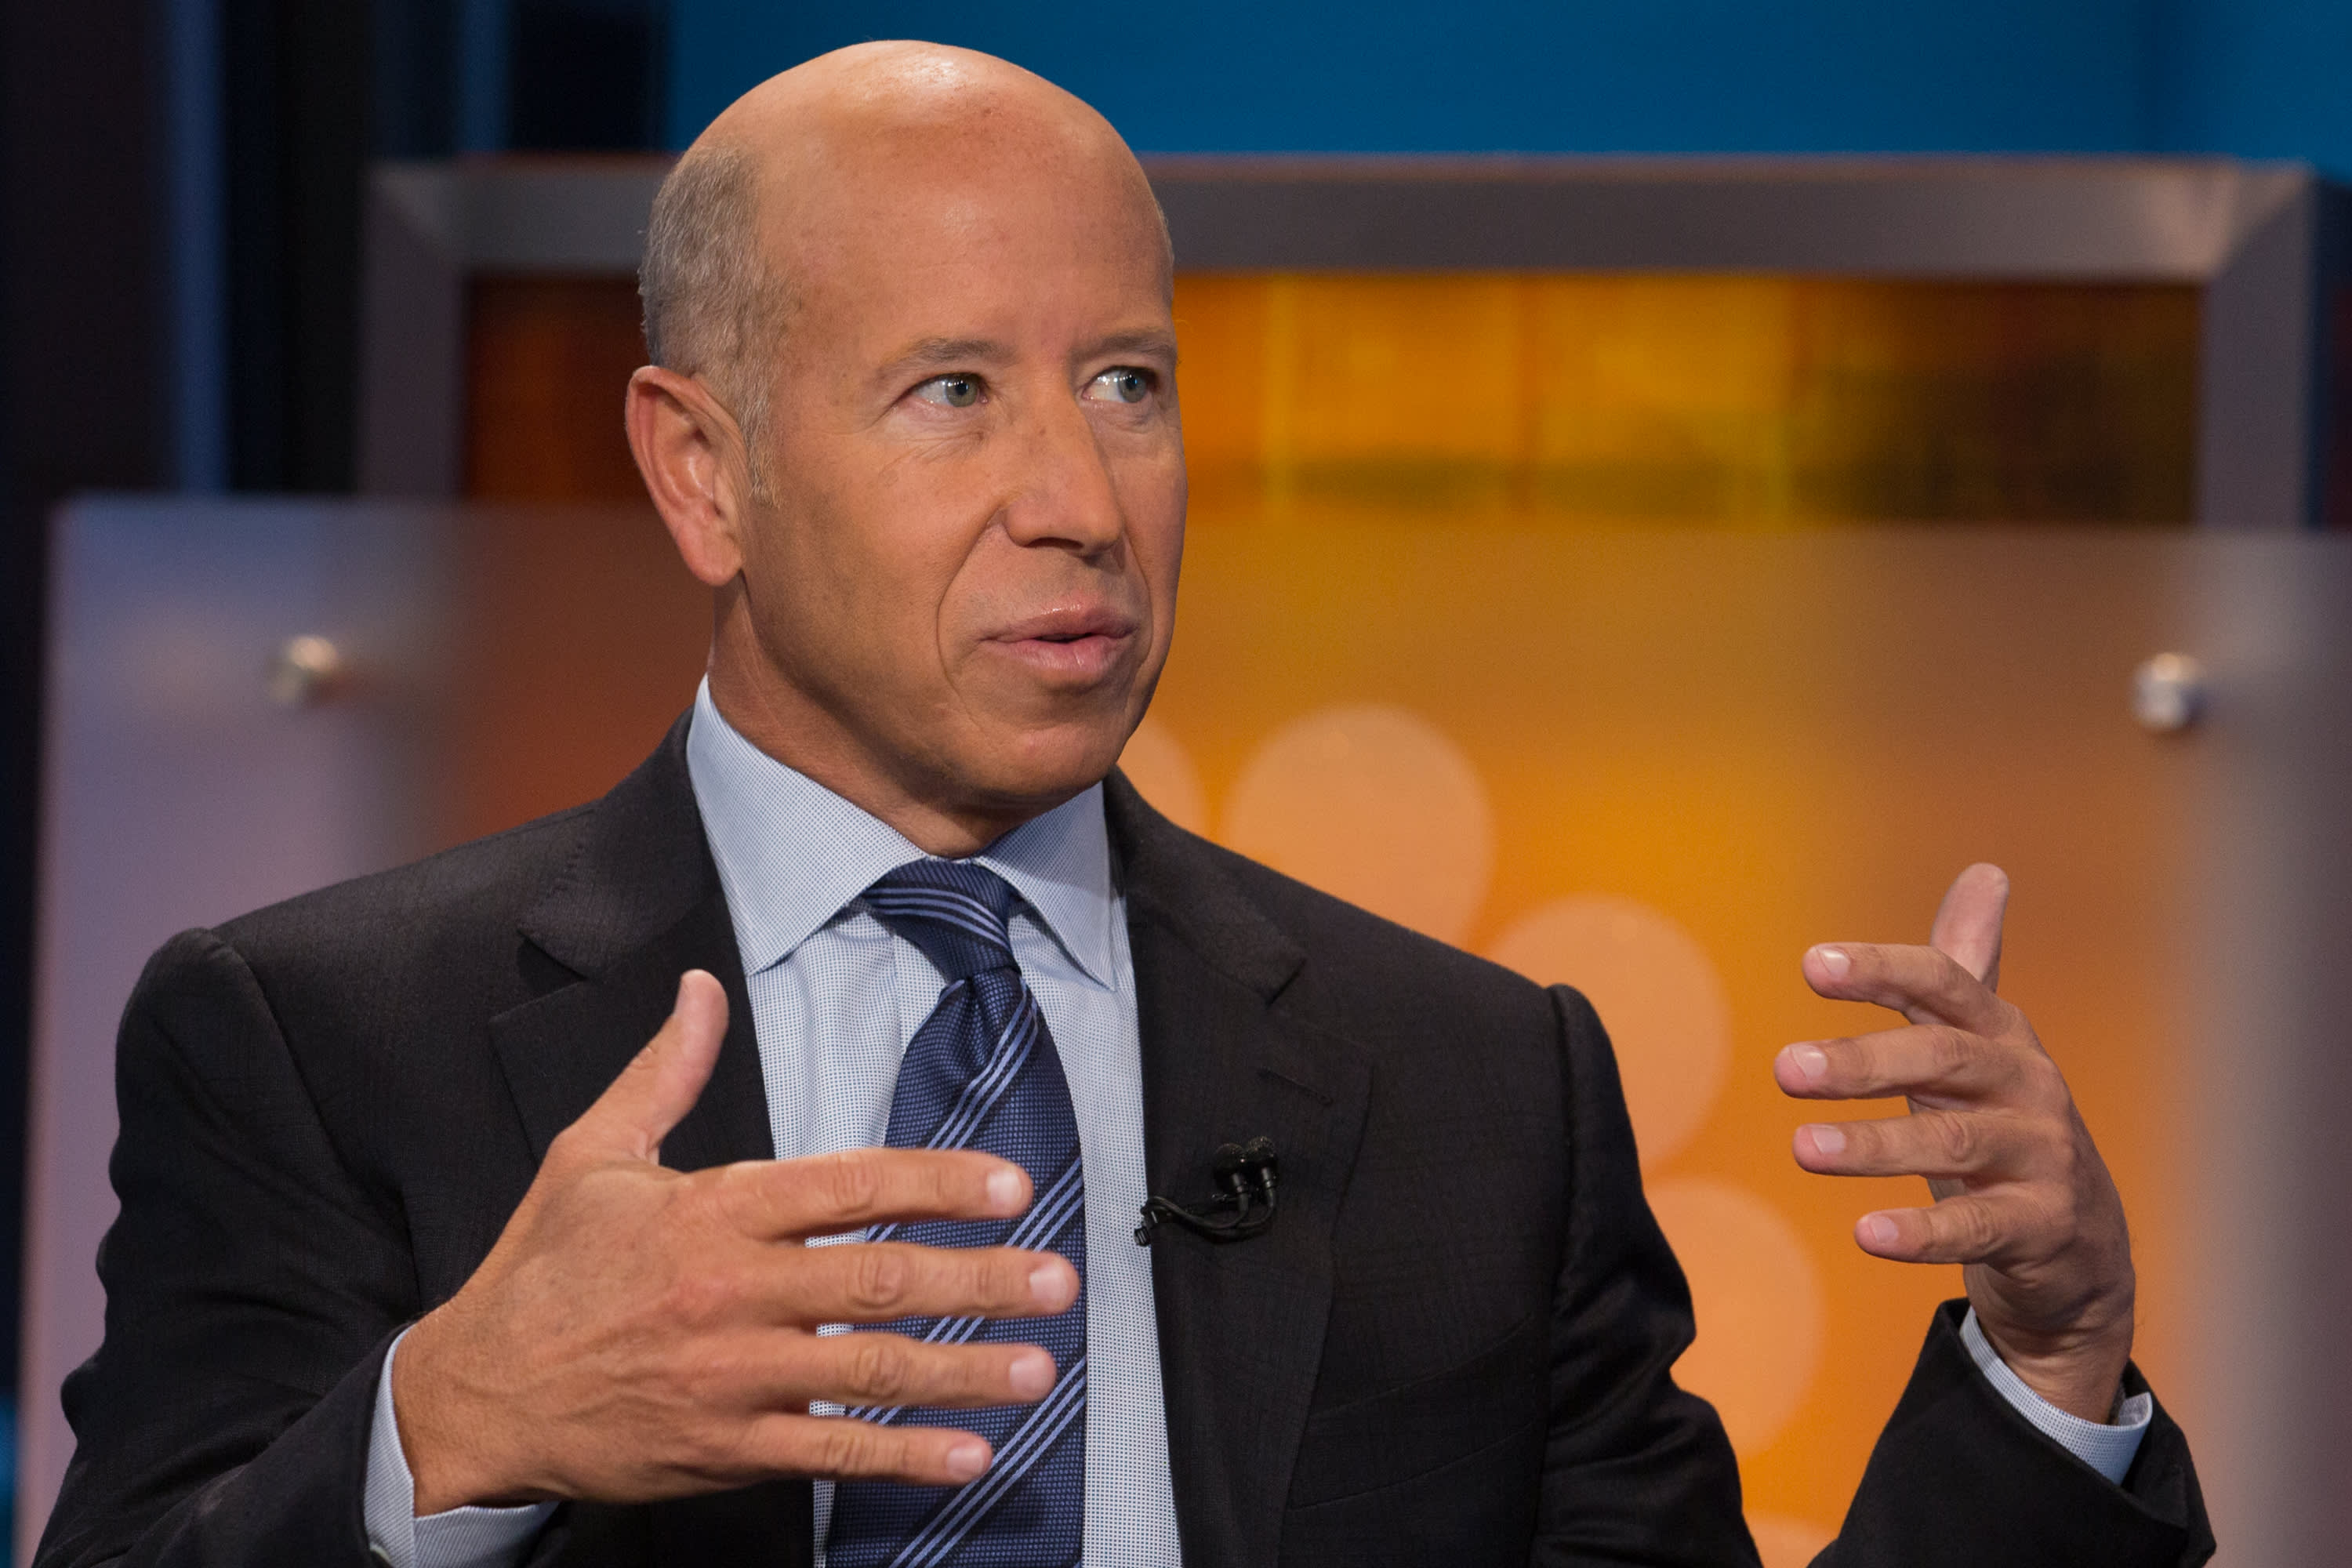 Starwood Capital’s Barry Sternlicht sees the economy having a hard landing due to Fed rate hikes